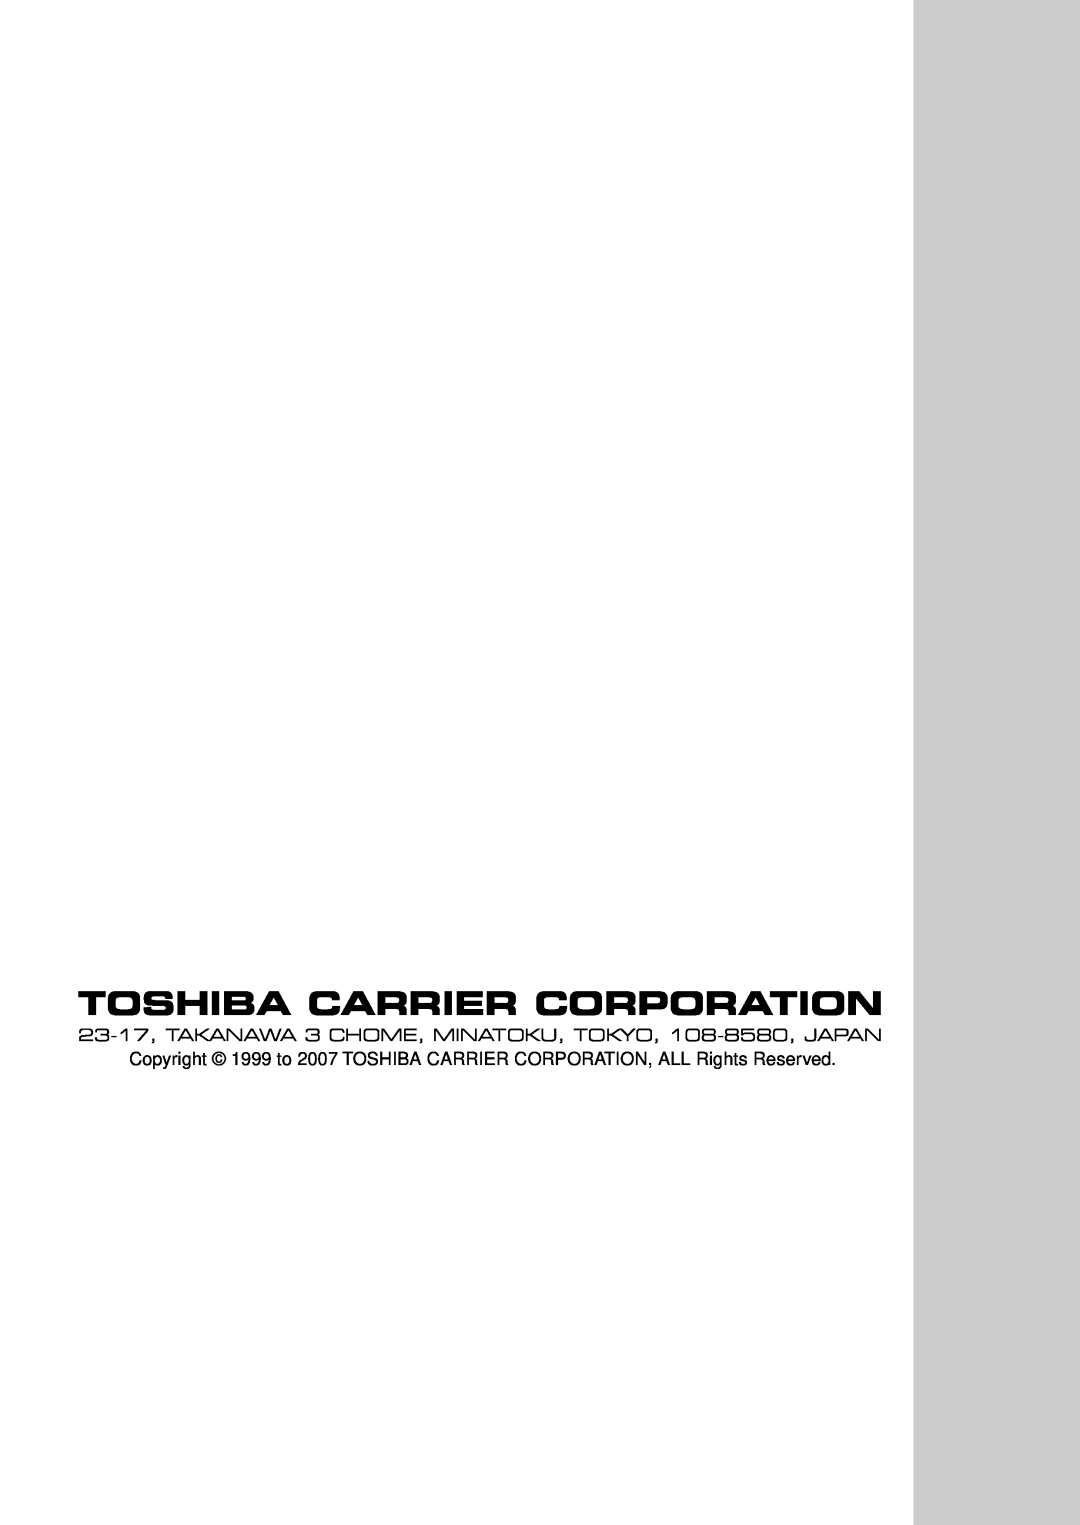 Toshiba RAV-SM1603ATZG-E, RAV-SM1603DT-A, RAV-SM1603ATZ-E, RAV-SM1403DT-A service manual Toshiba Carrier Corporation 